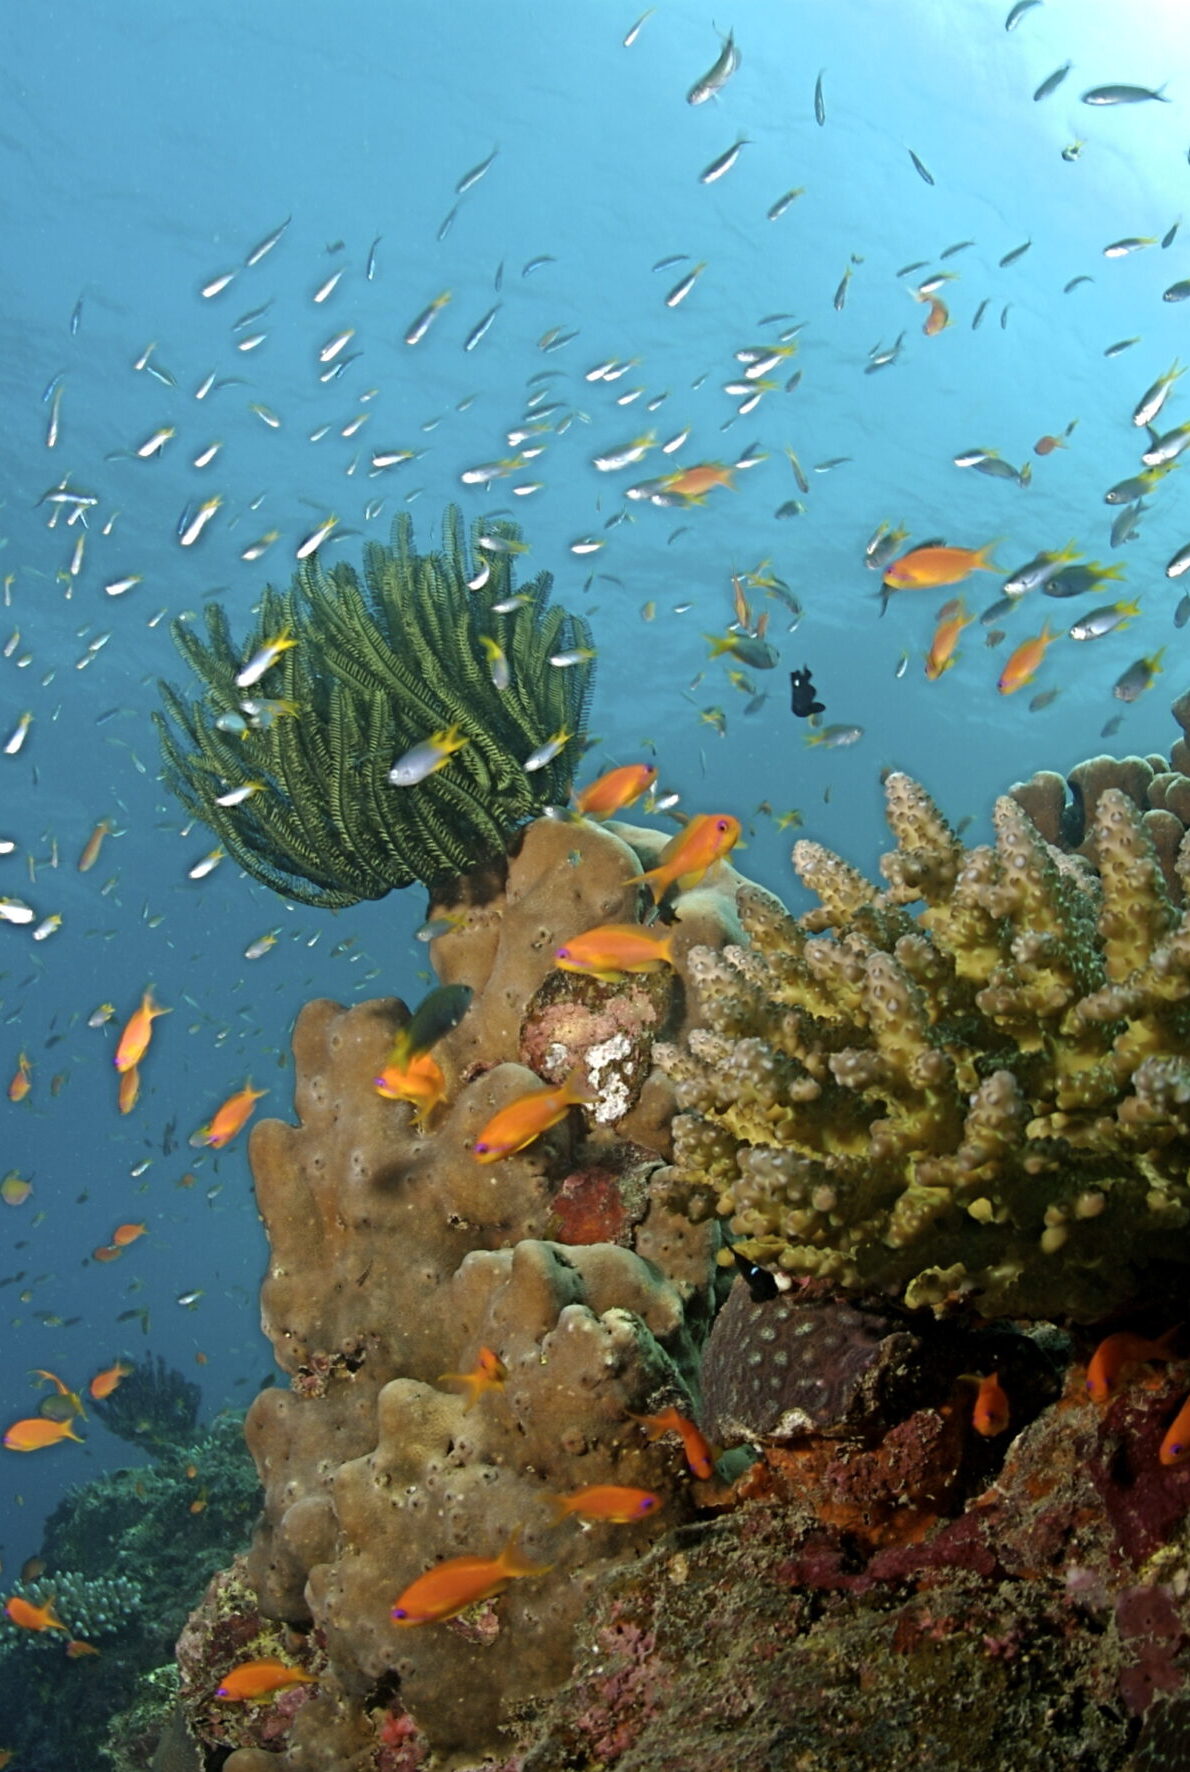 A colorful coral reef, surrounded by fish